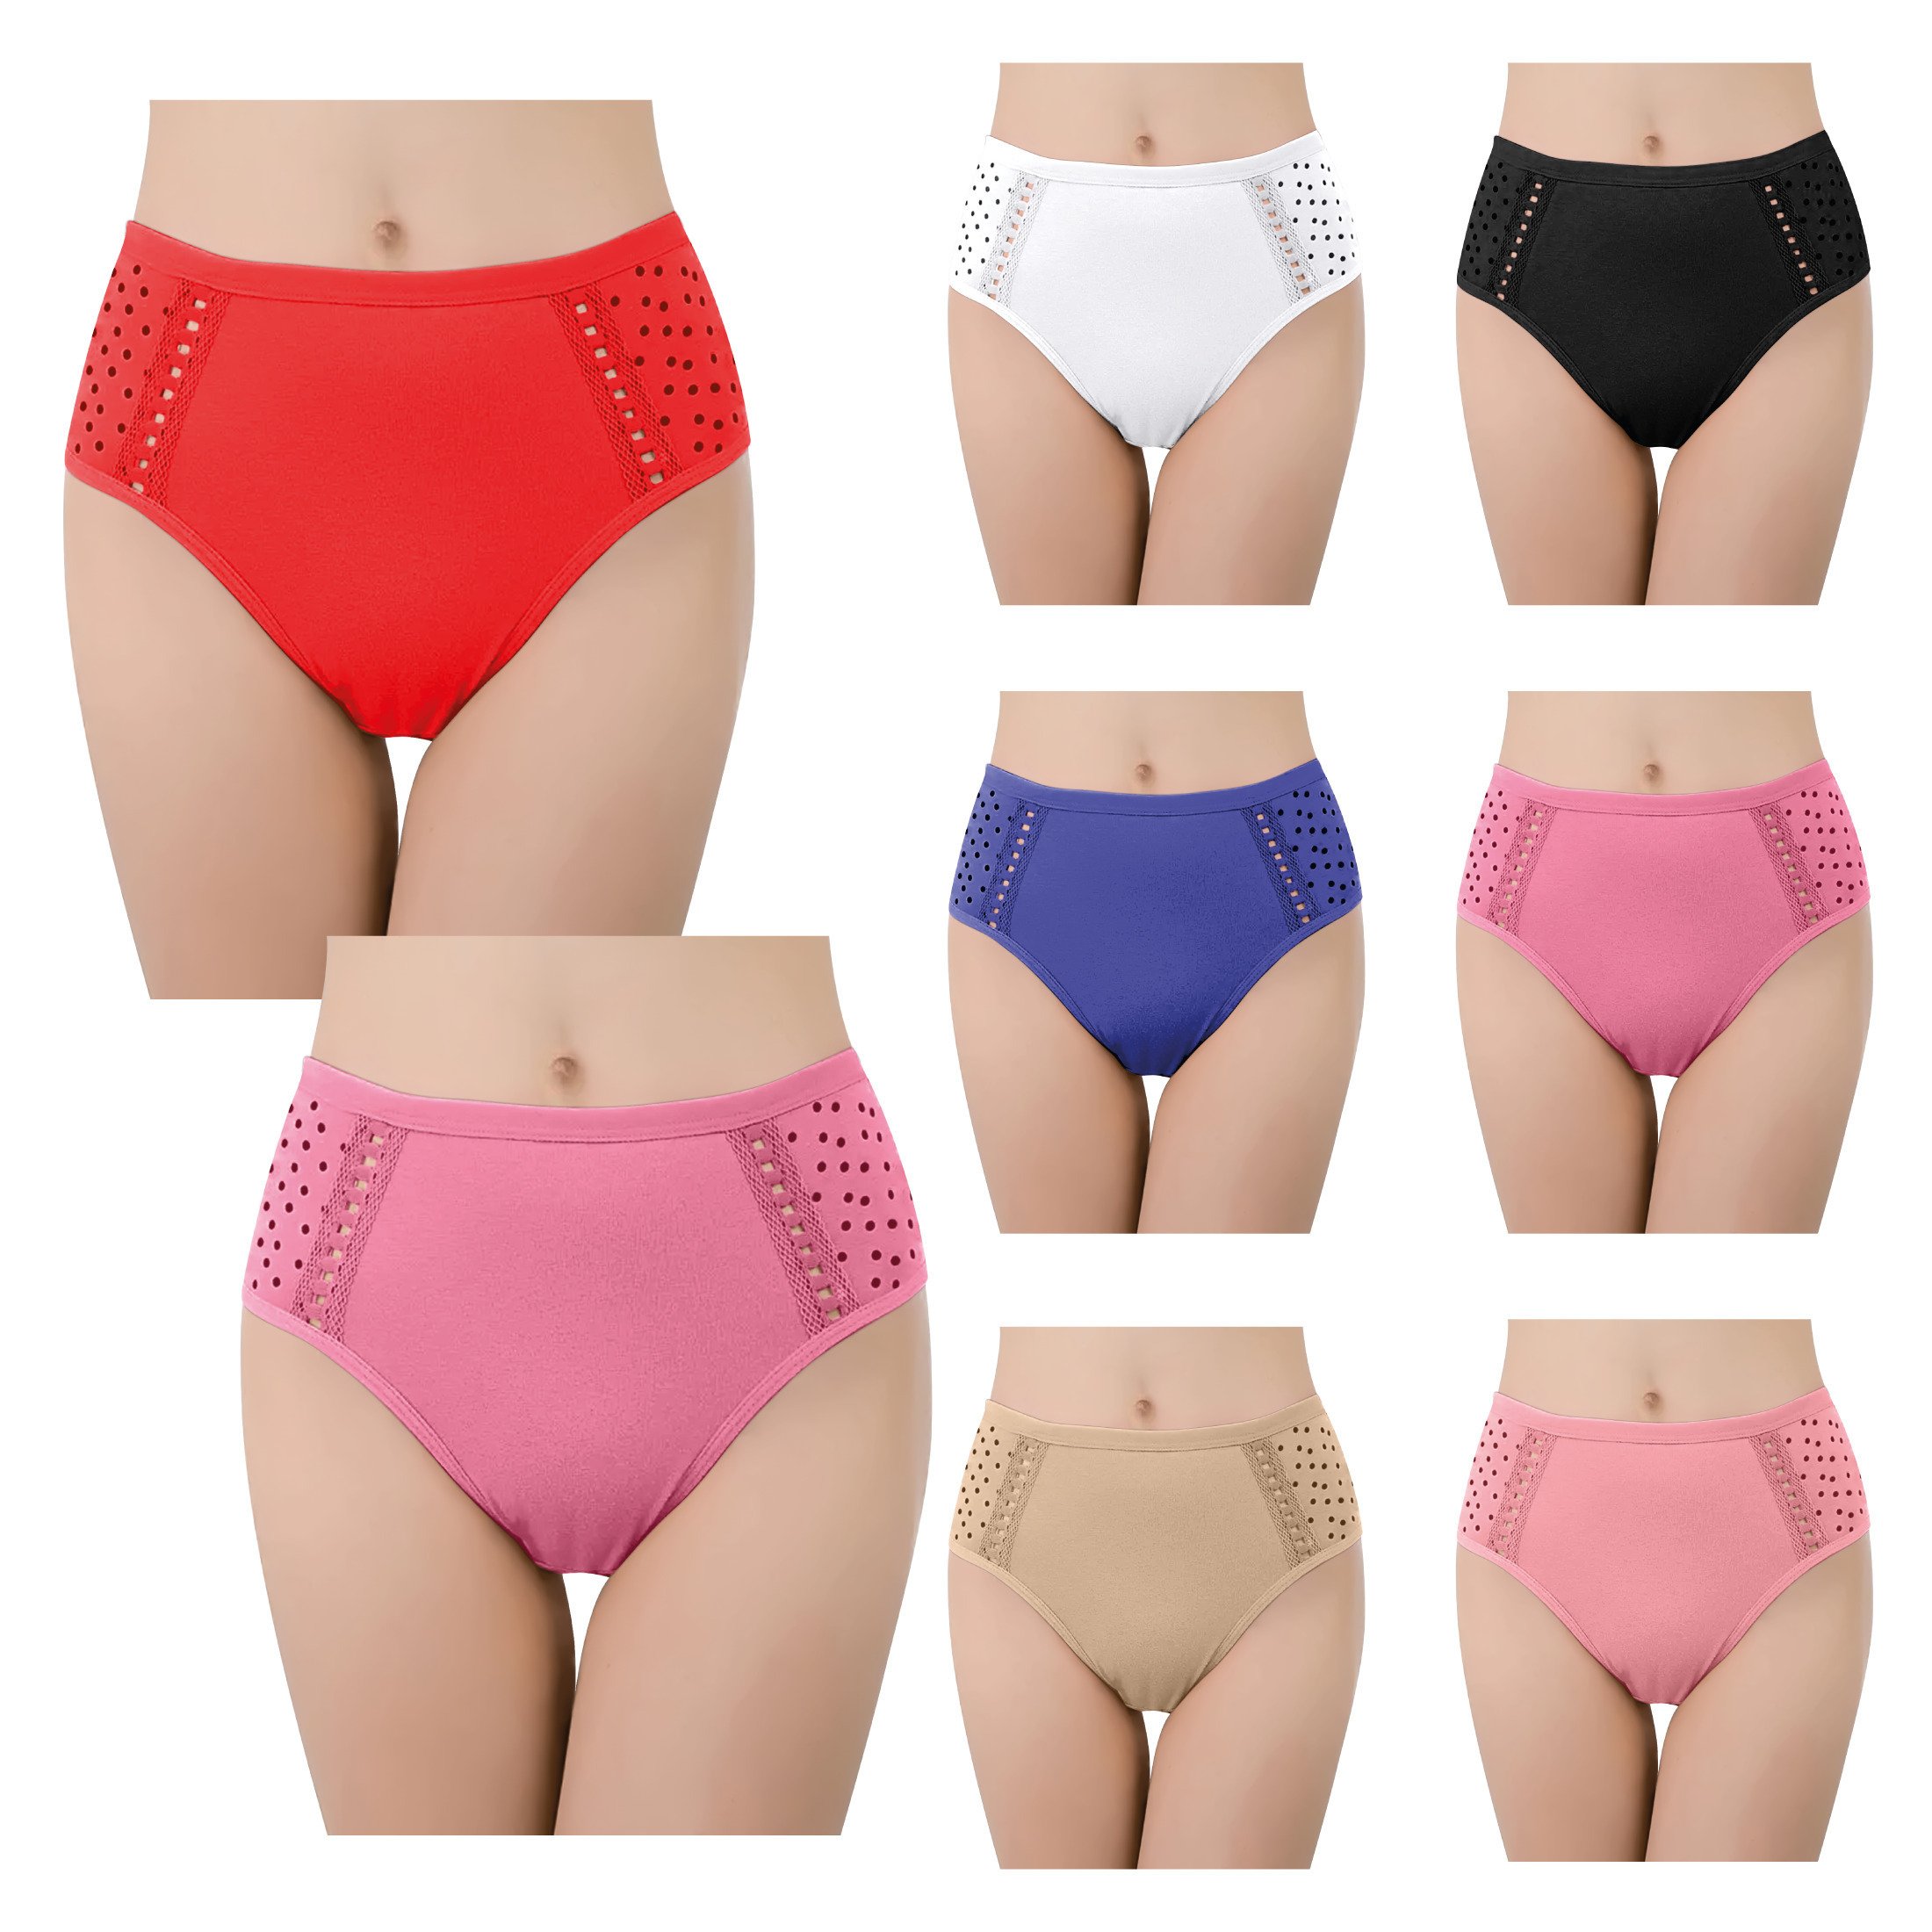 Generic 6-Pack: Women's Ultra Soft Moisture Wicking Panties Cotton Perfect Fit Underwear (Plus Sizes Available )